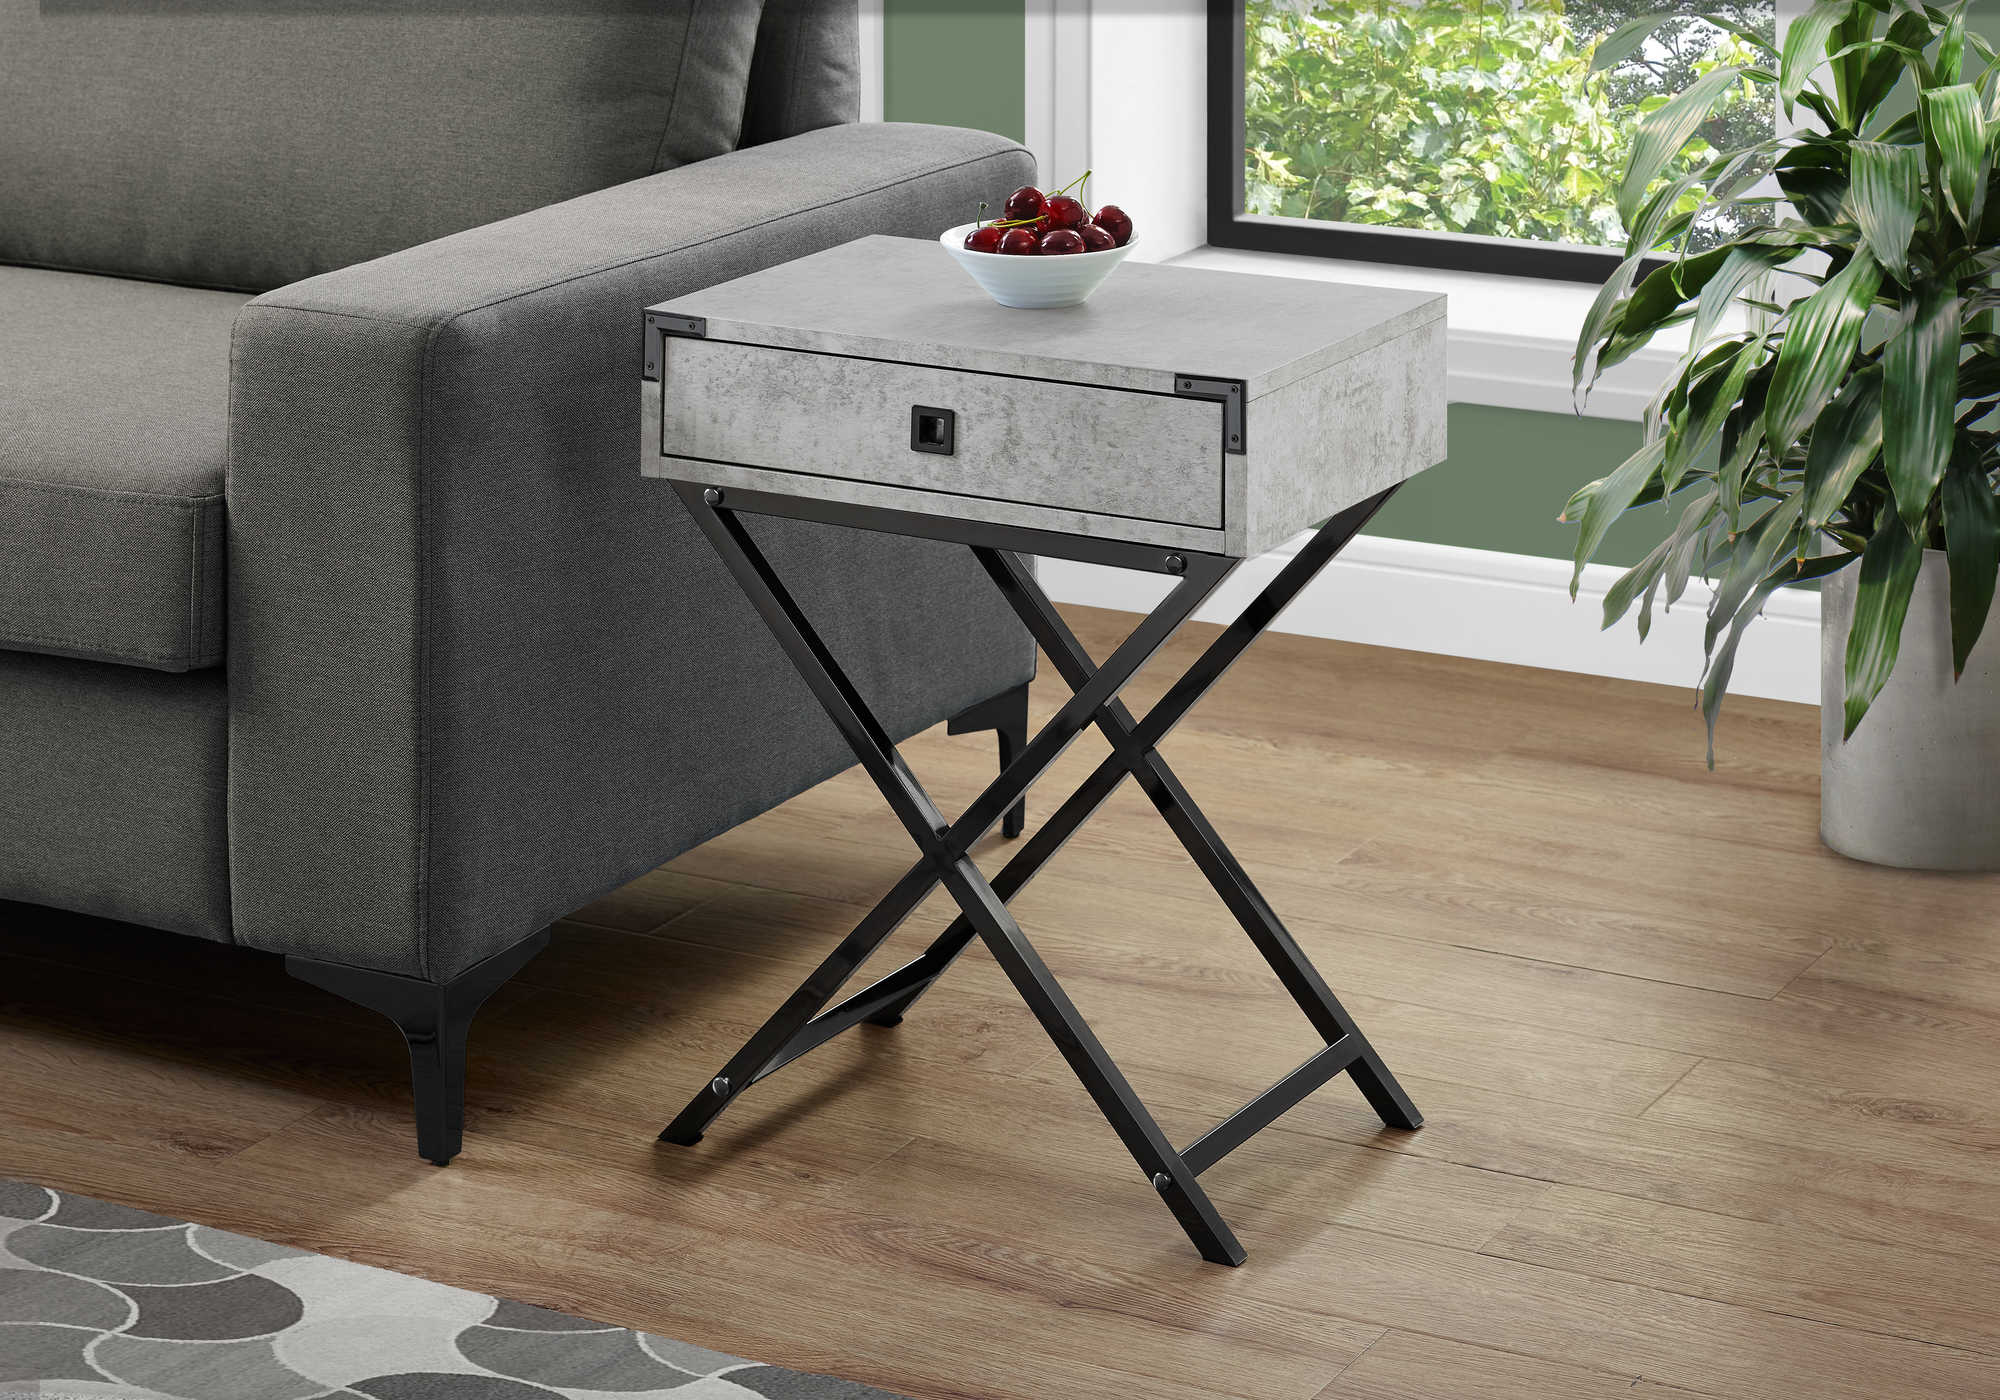 ACCENT TABLE - 24"H / GREY CEMENT / BLACK NICKEL METAL